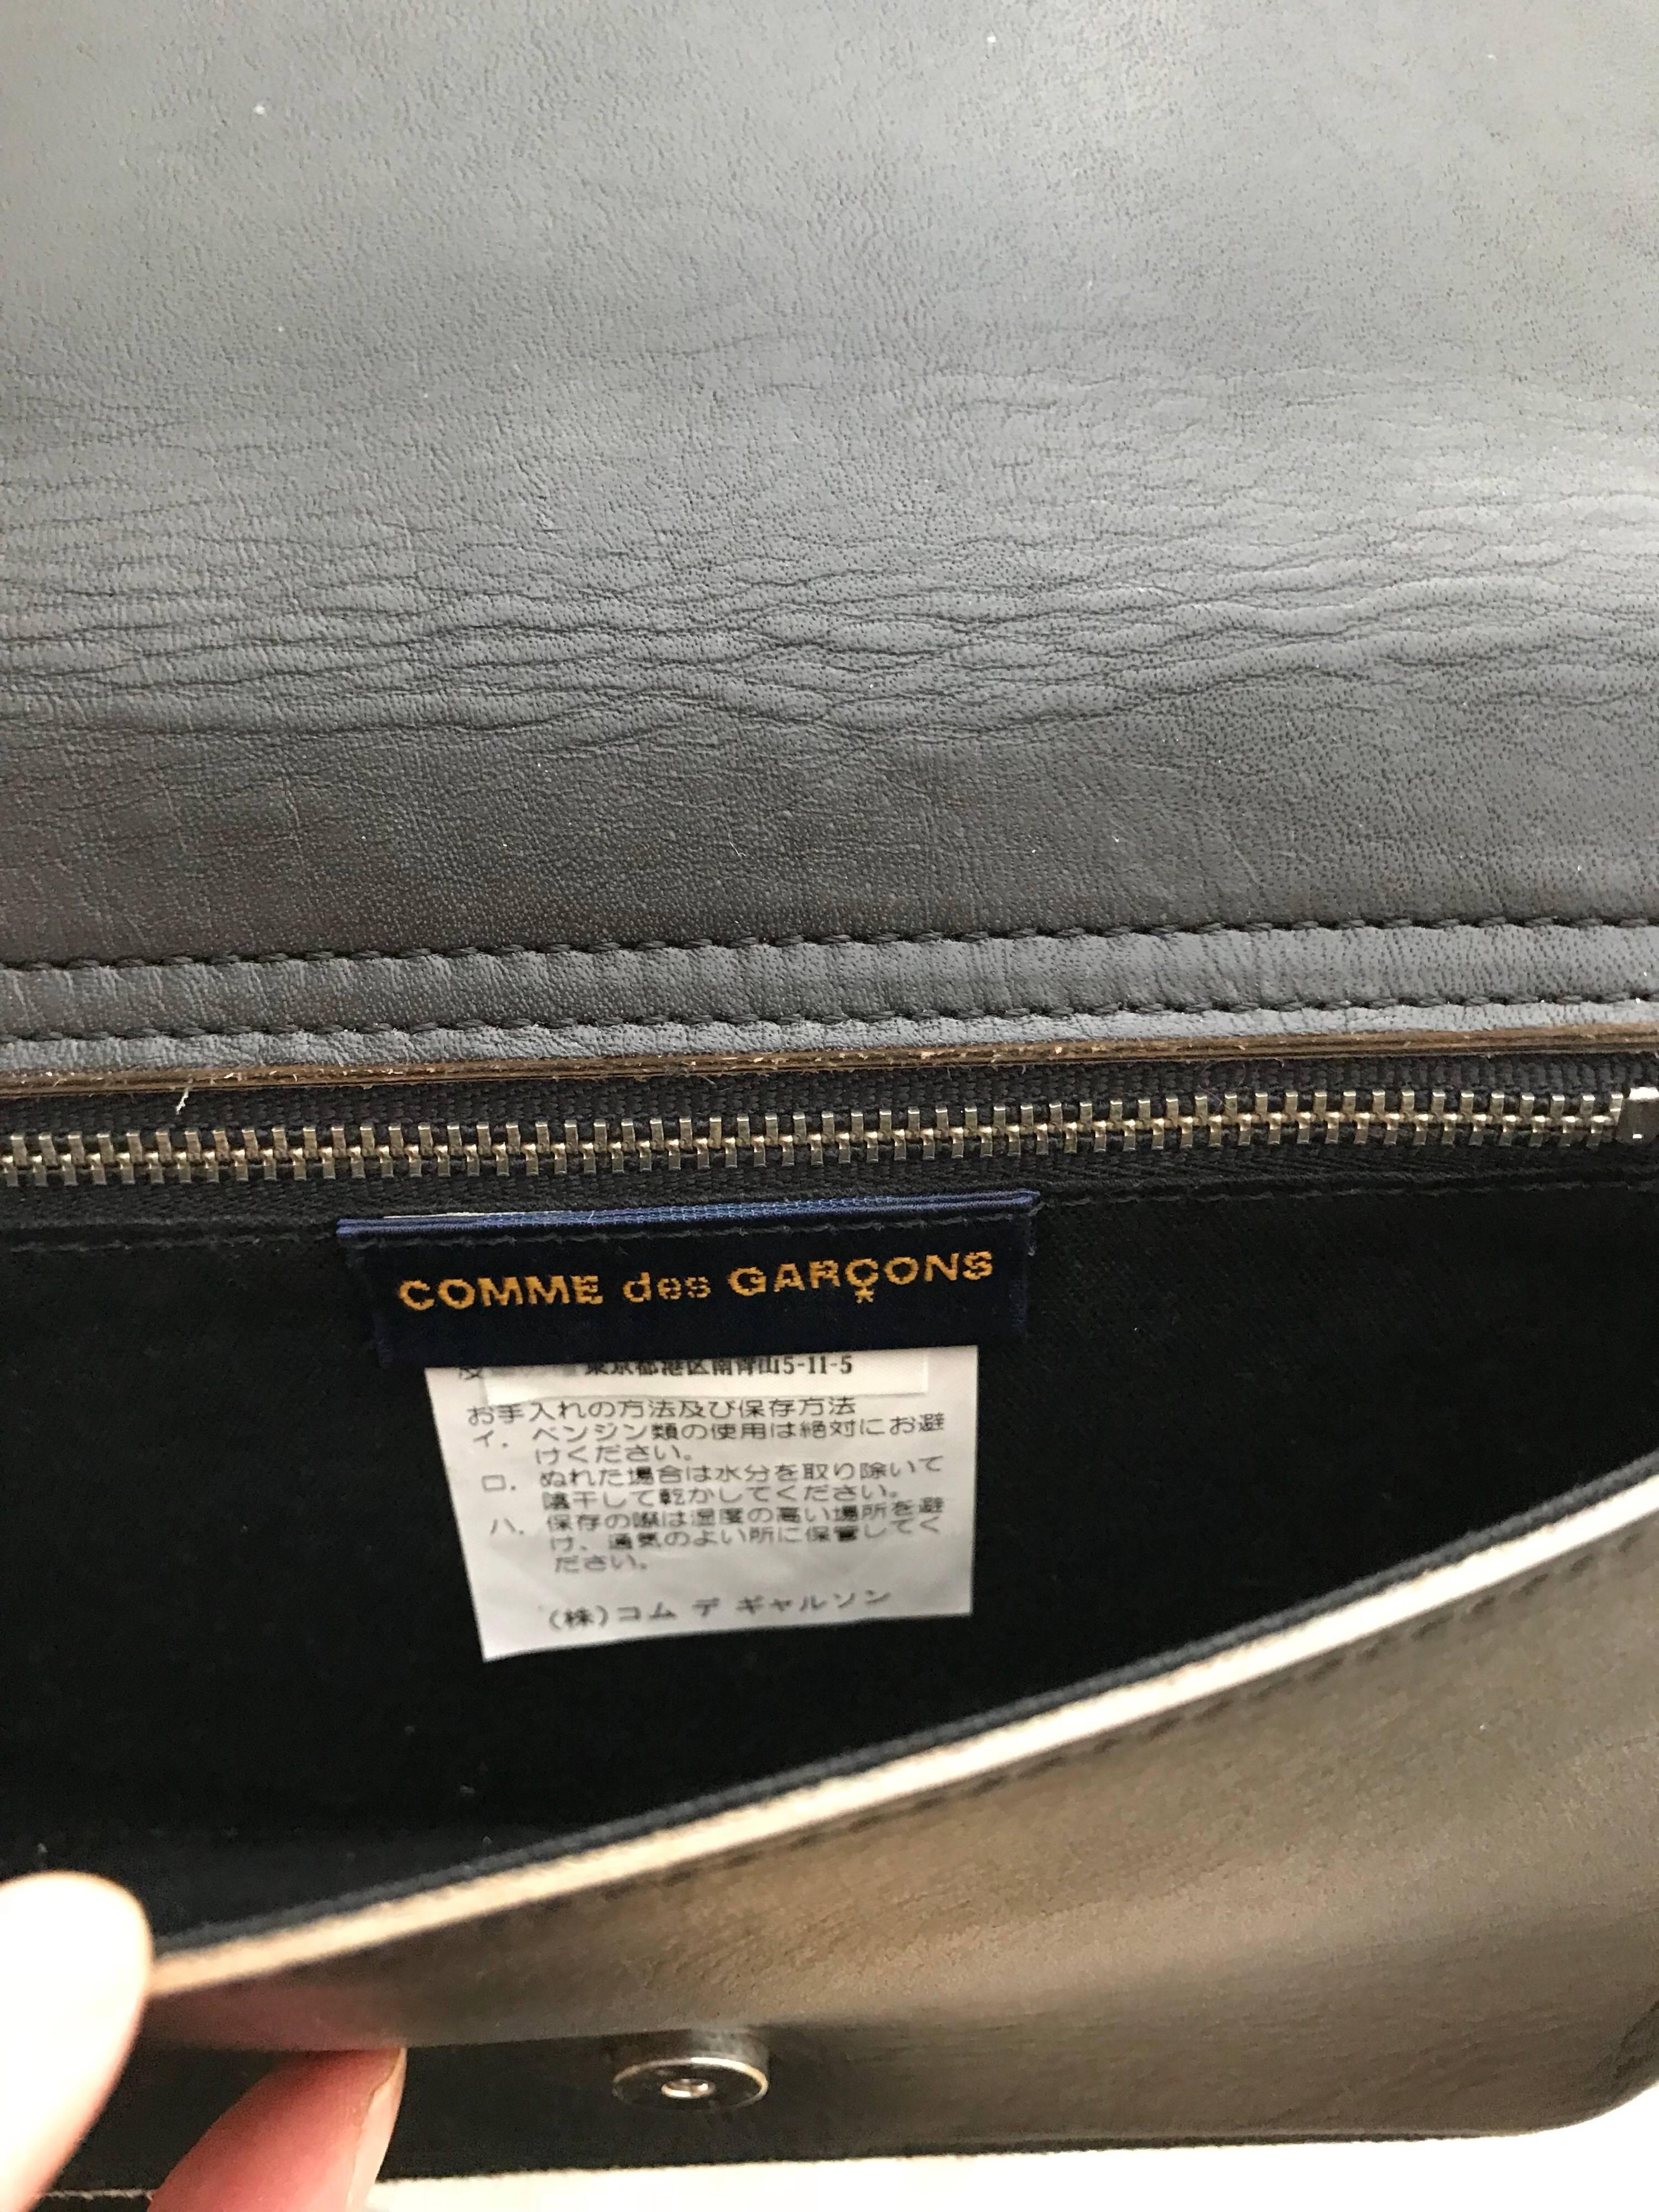 Comme des garçons Black Leather Grommets Purse In Good Condition For Sale In Beverly Hills, CA